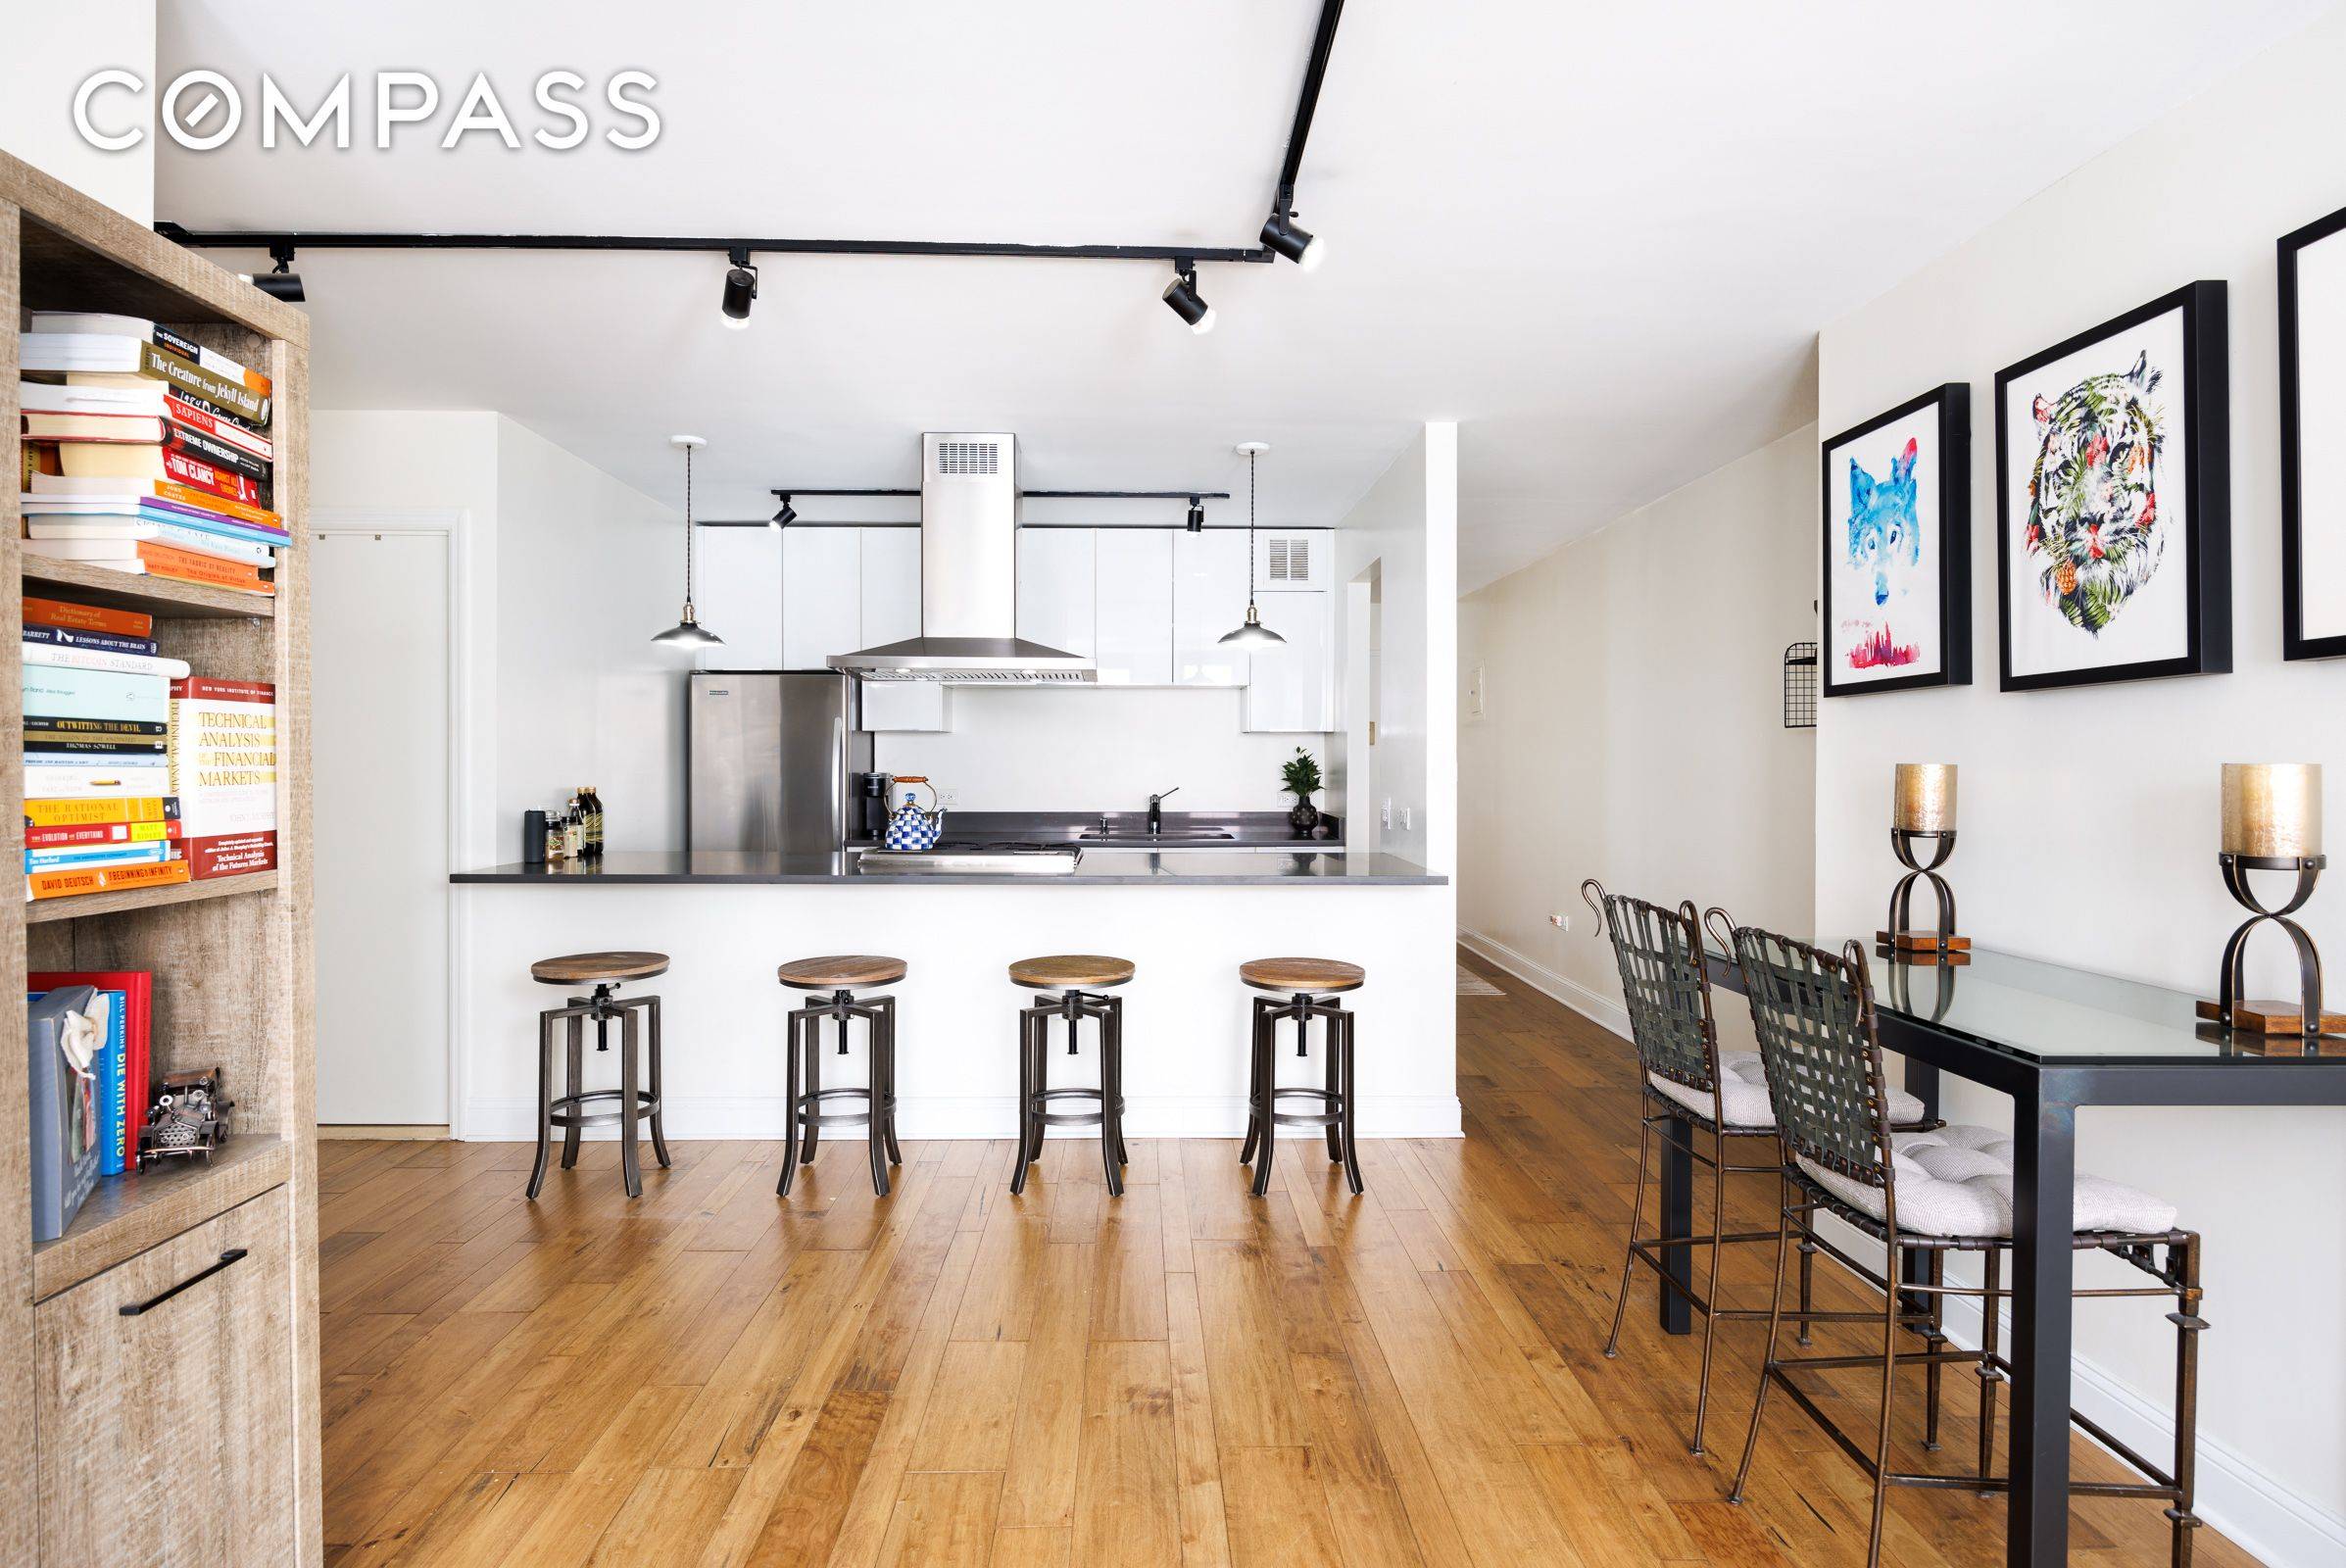 Residing on the intersection of NYC s most desirable neighborhoods including West Village, Meatpacking, and Southern Chelsea is 222 West 14th Street, Unit 3N, an impeccably renovated oversized 1 bedroom, ...